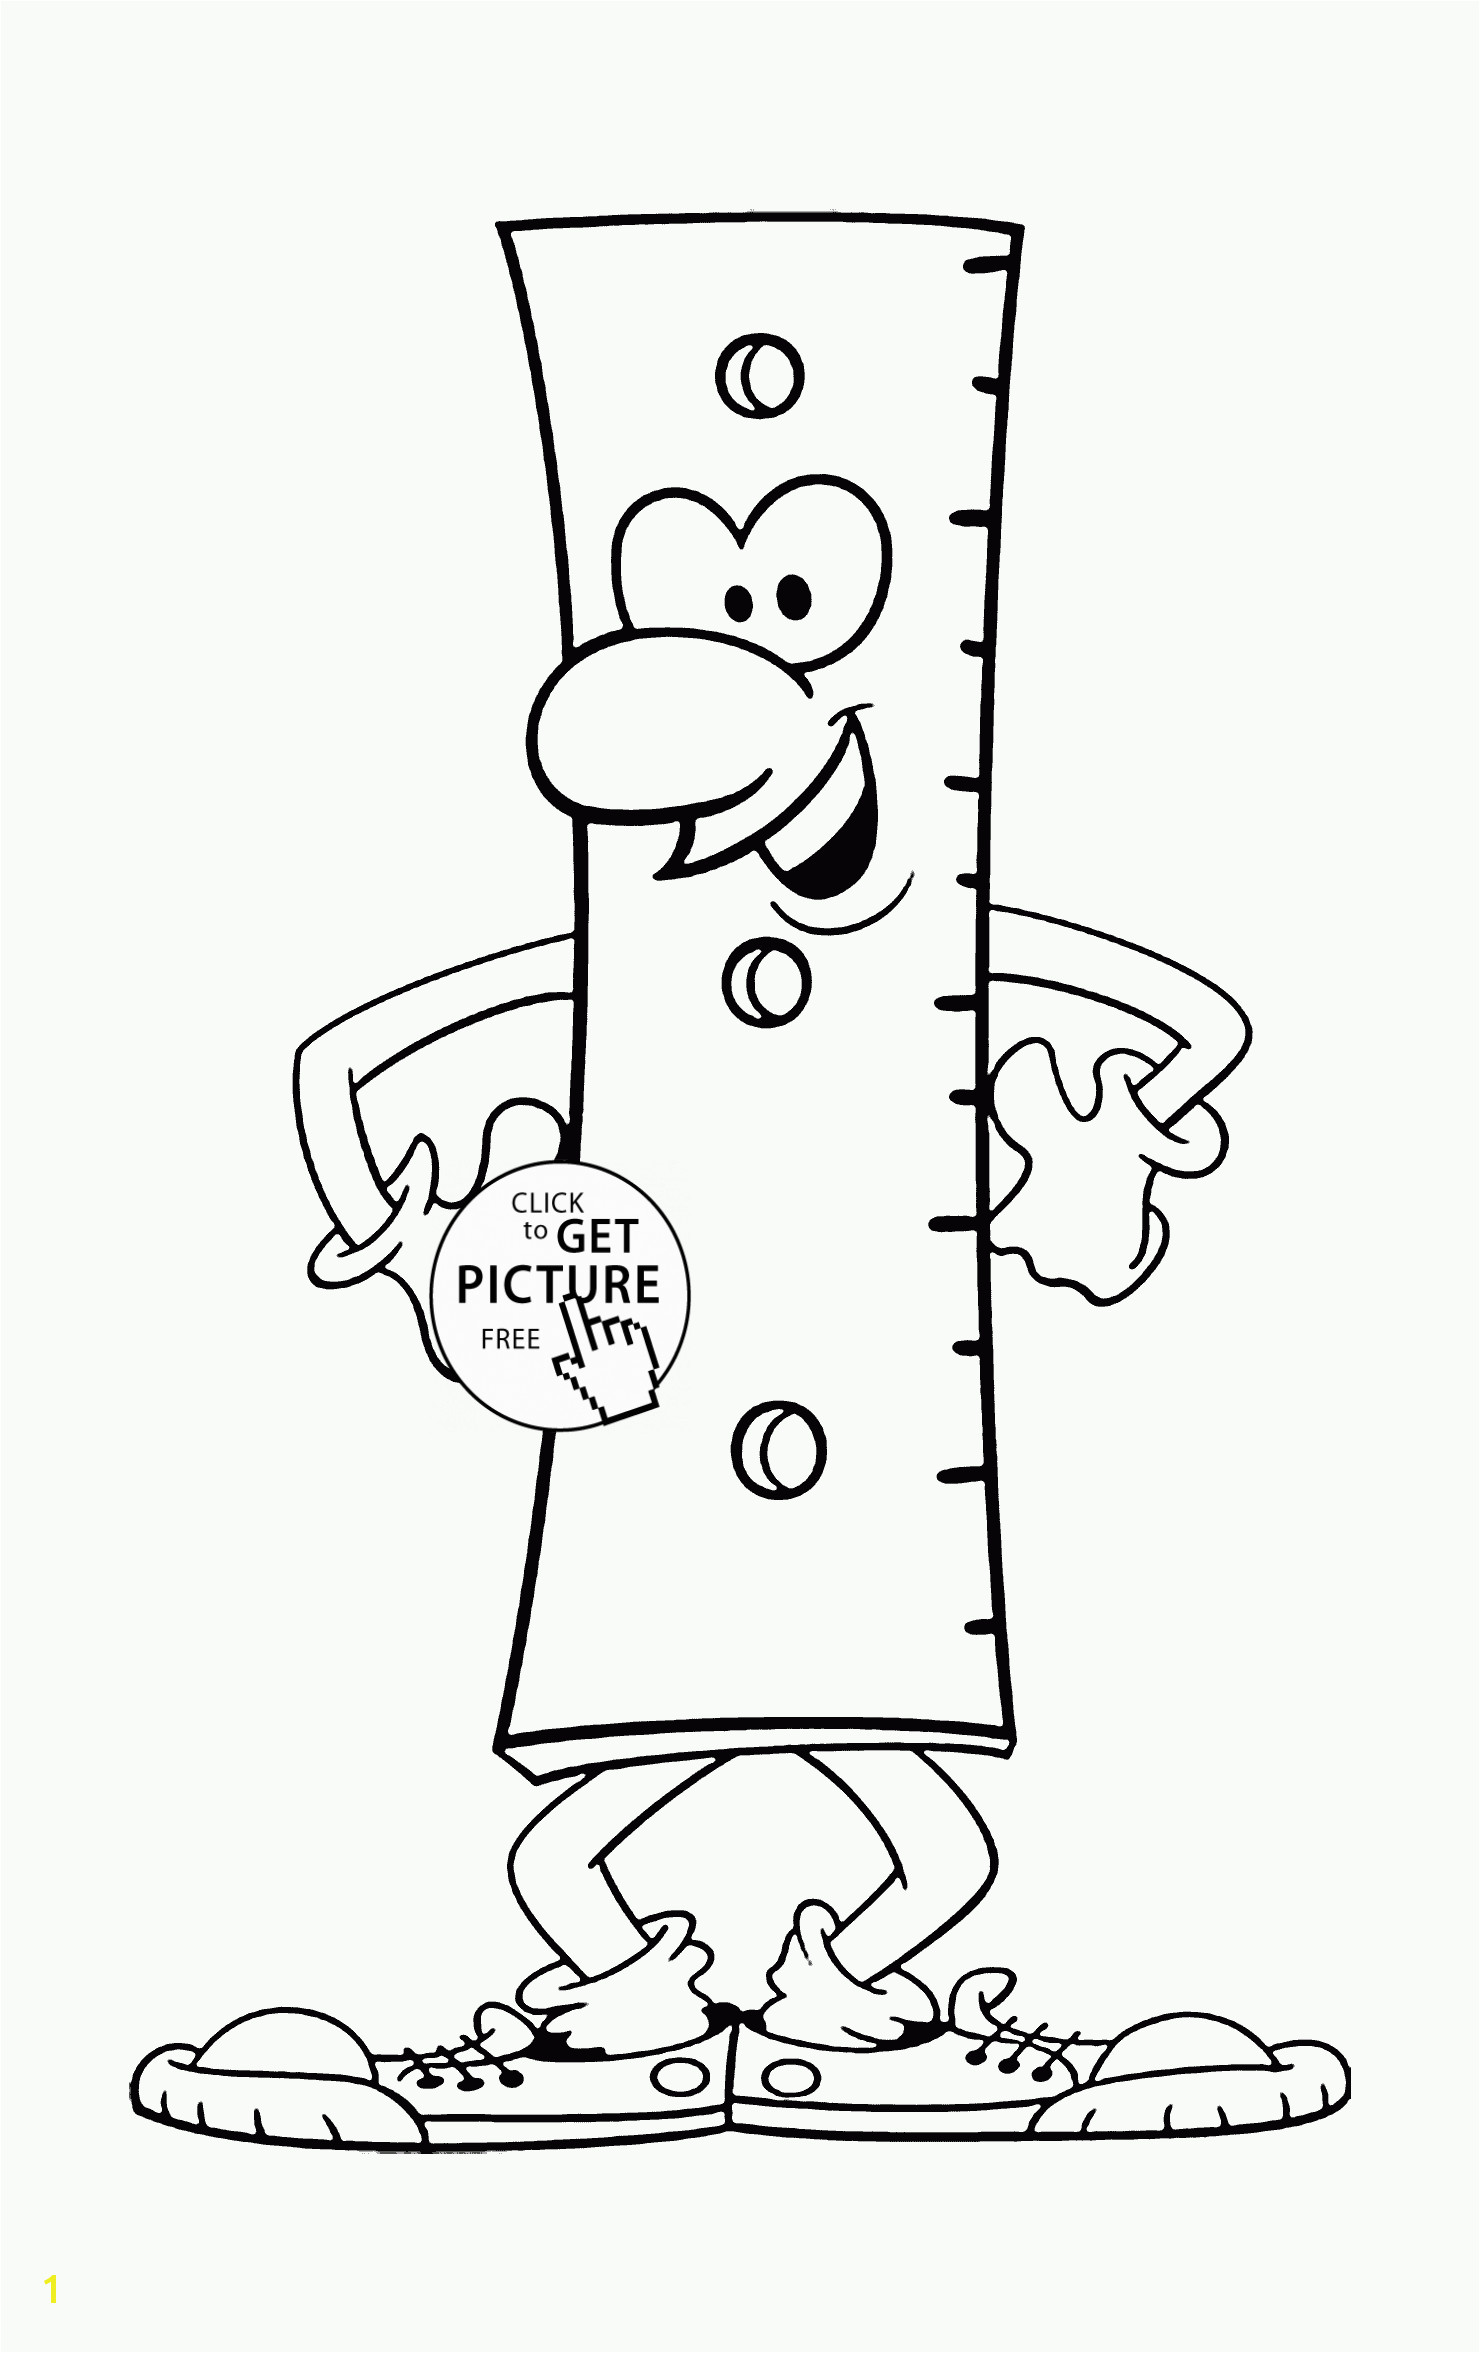 Back to School Funny Ruler coloring page for kids educational coloring pages printables free Wuppsy